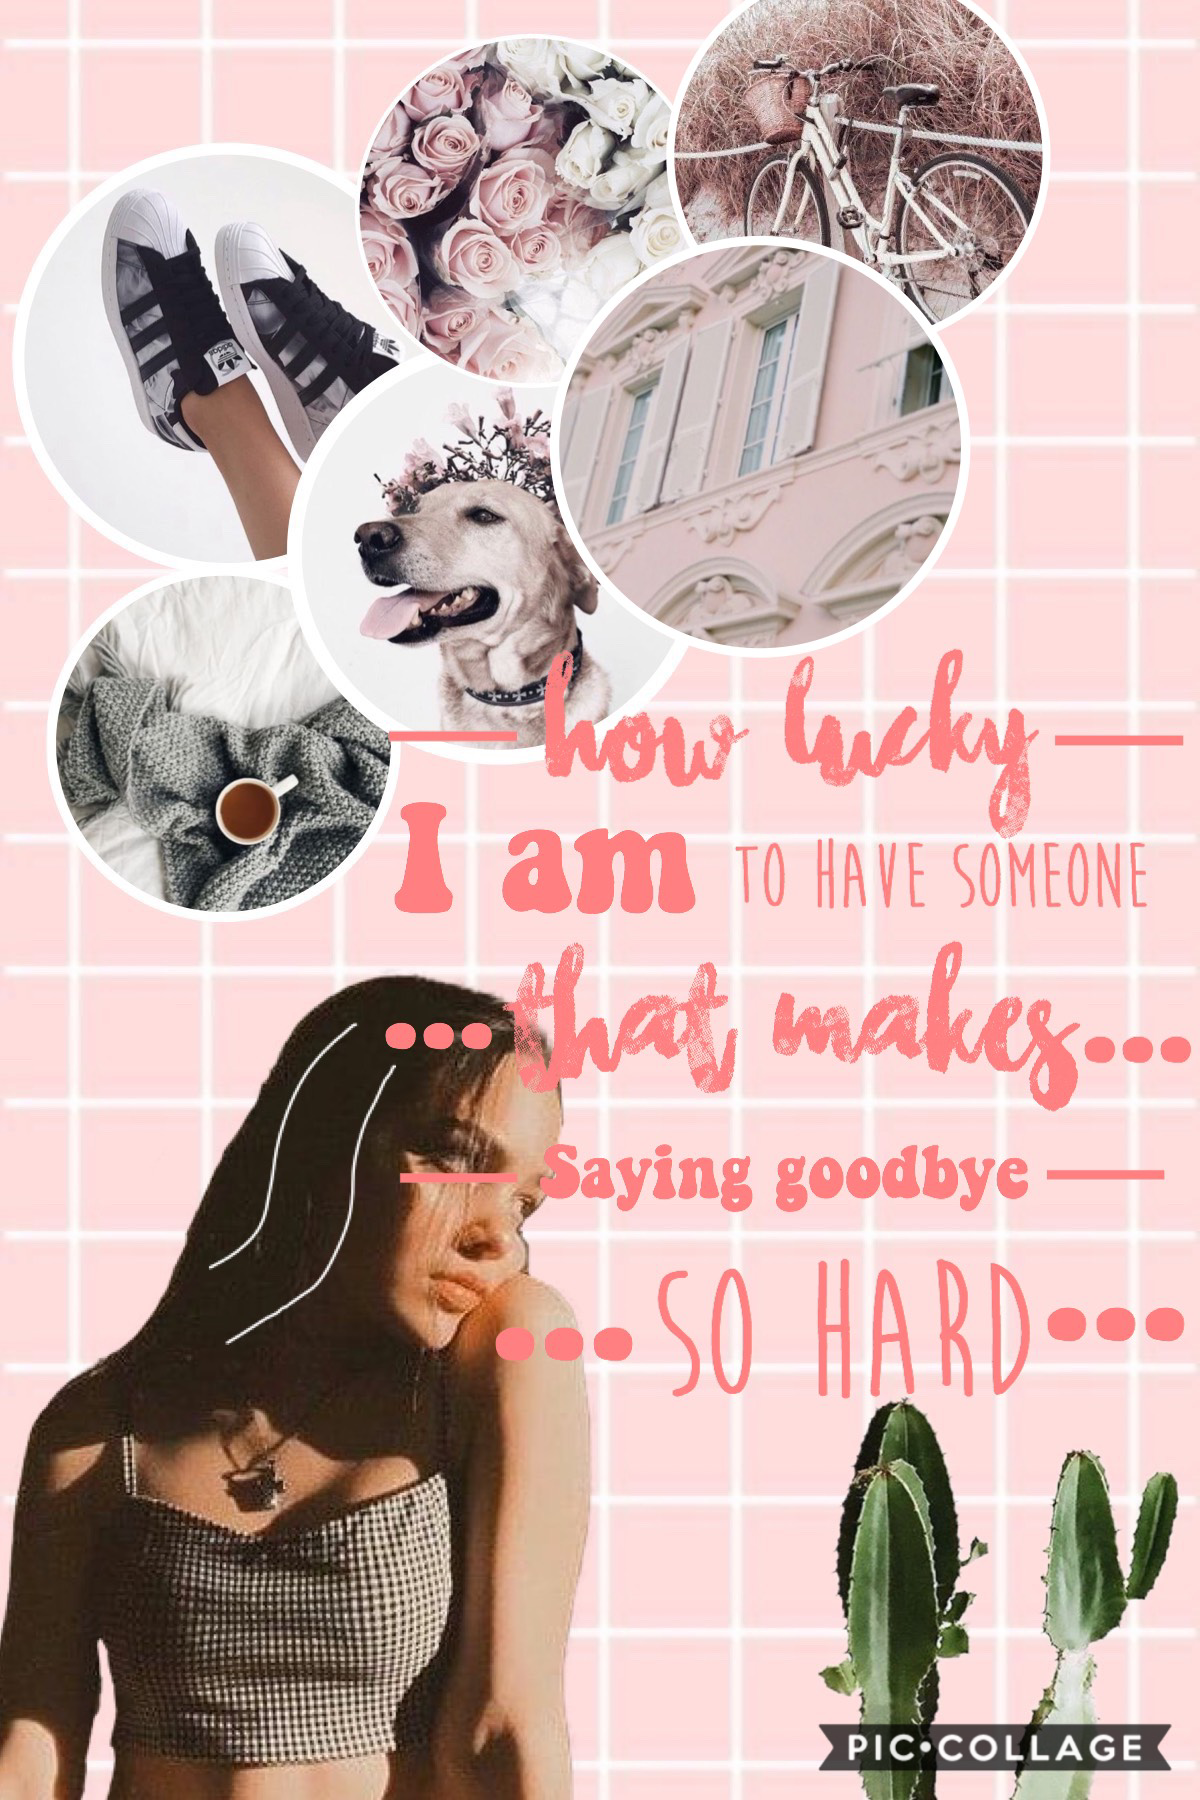 💗tap💗
Hello, i was inspired by all the amazing collages on the explore page and I made this. I hope you enjoy it. 
Q: what is your favourite animal? 
Follower count: 2
27/07/2019
- sapphire_song
